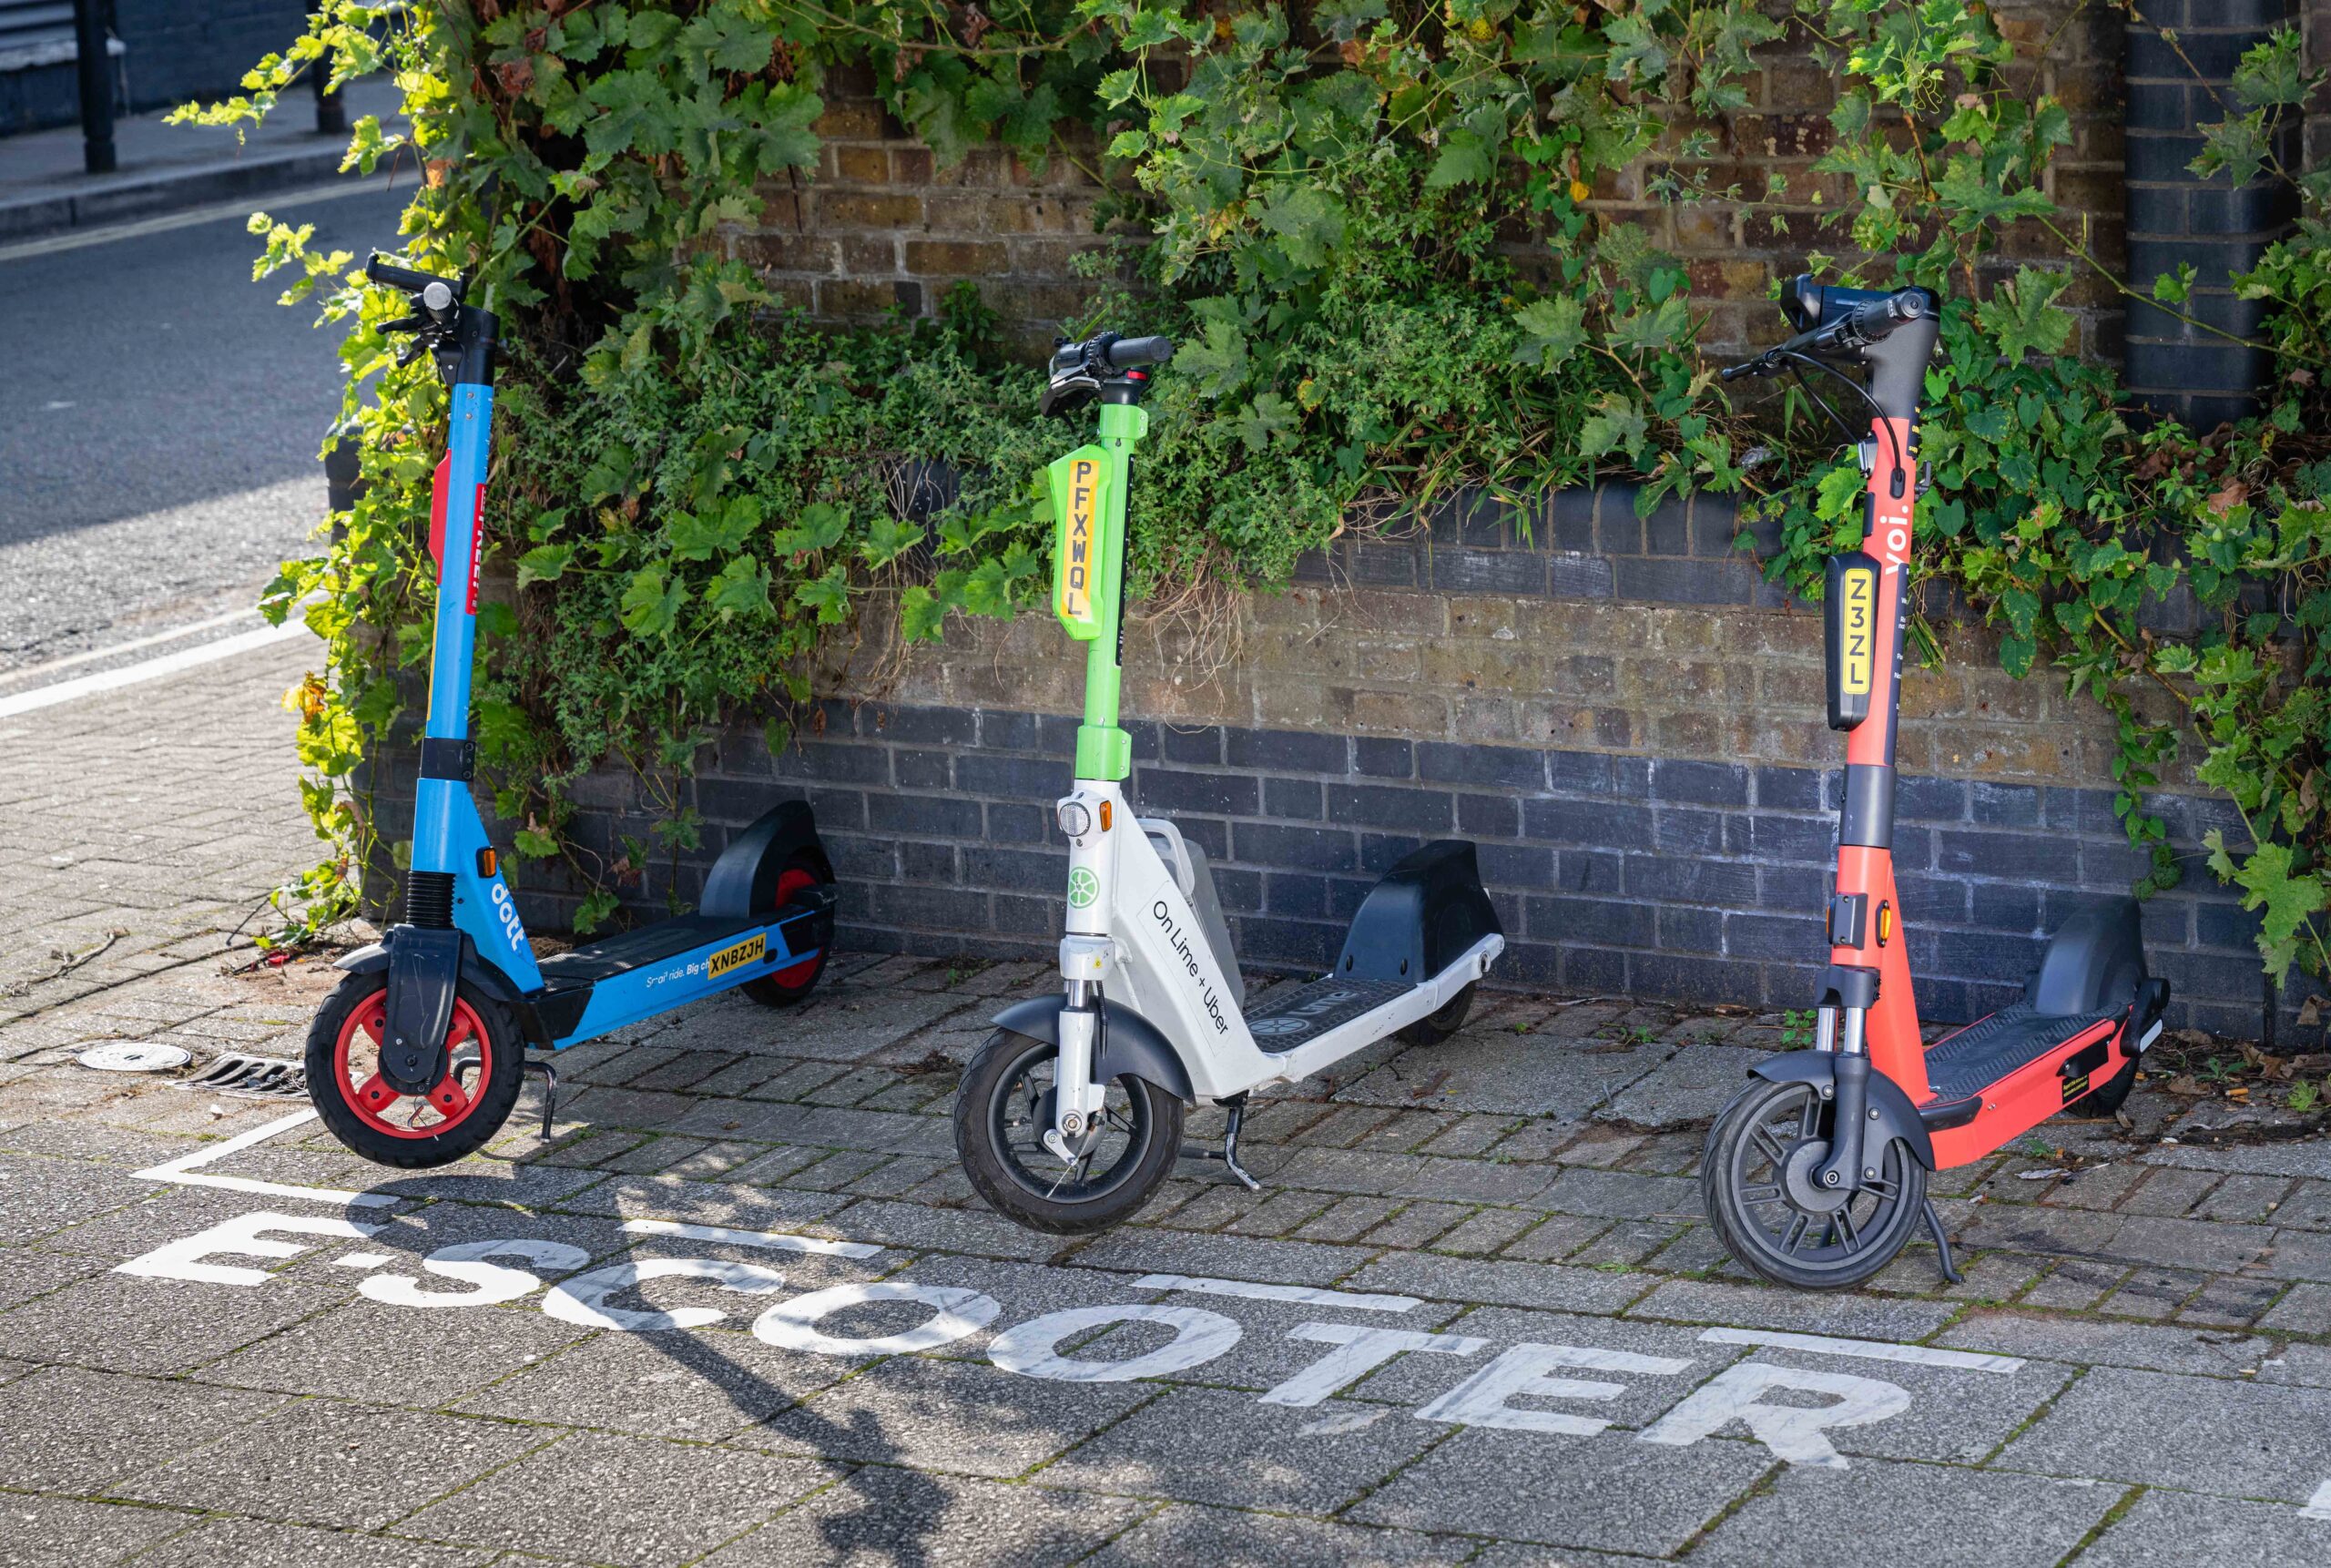 More than three million trips have been made on London’s rental e-scooters since the trial first launched in June 2021